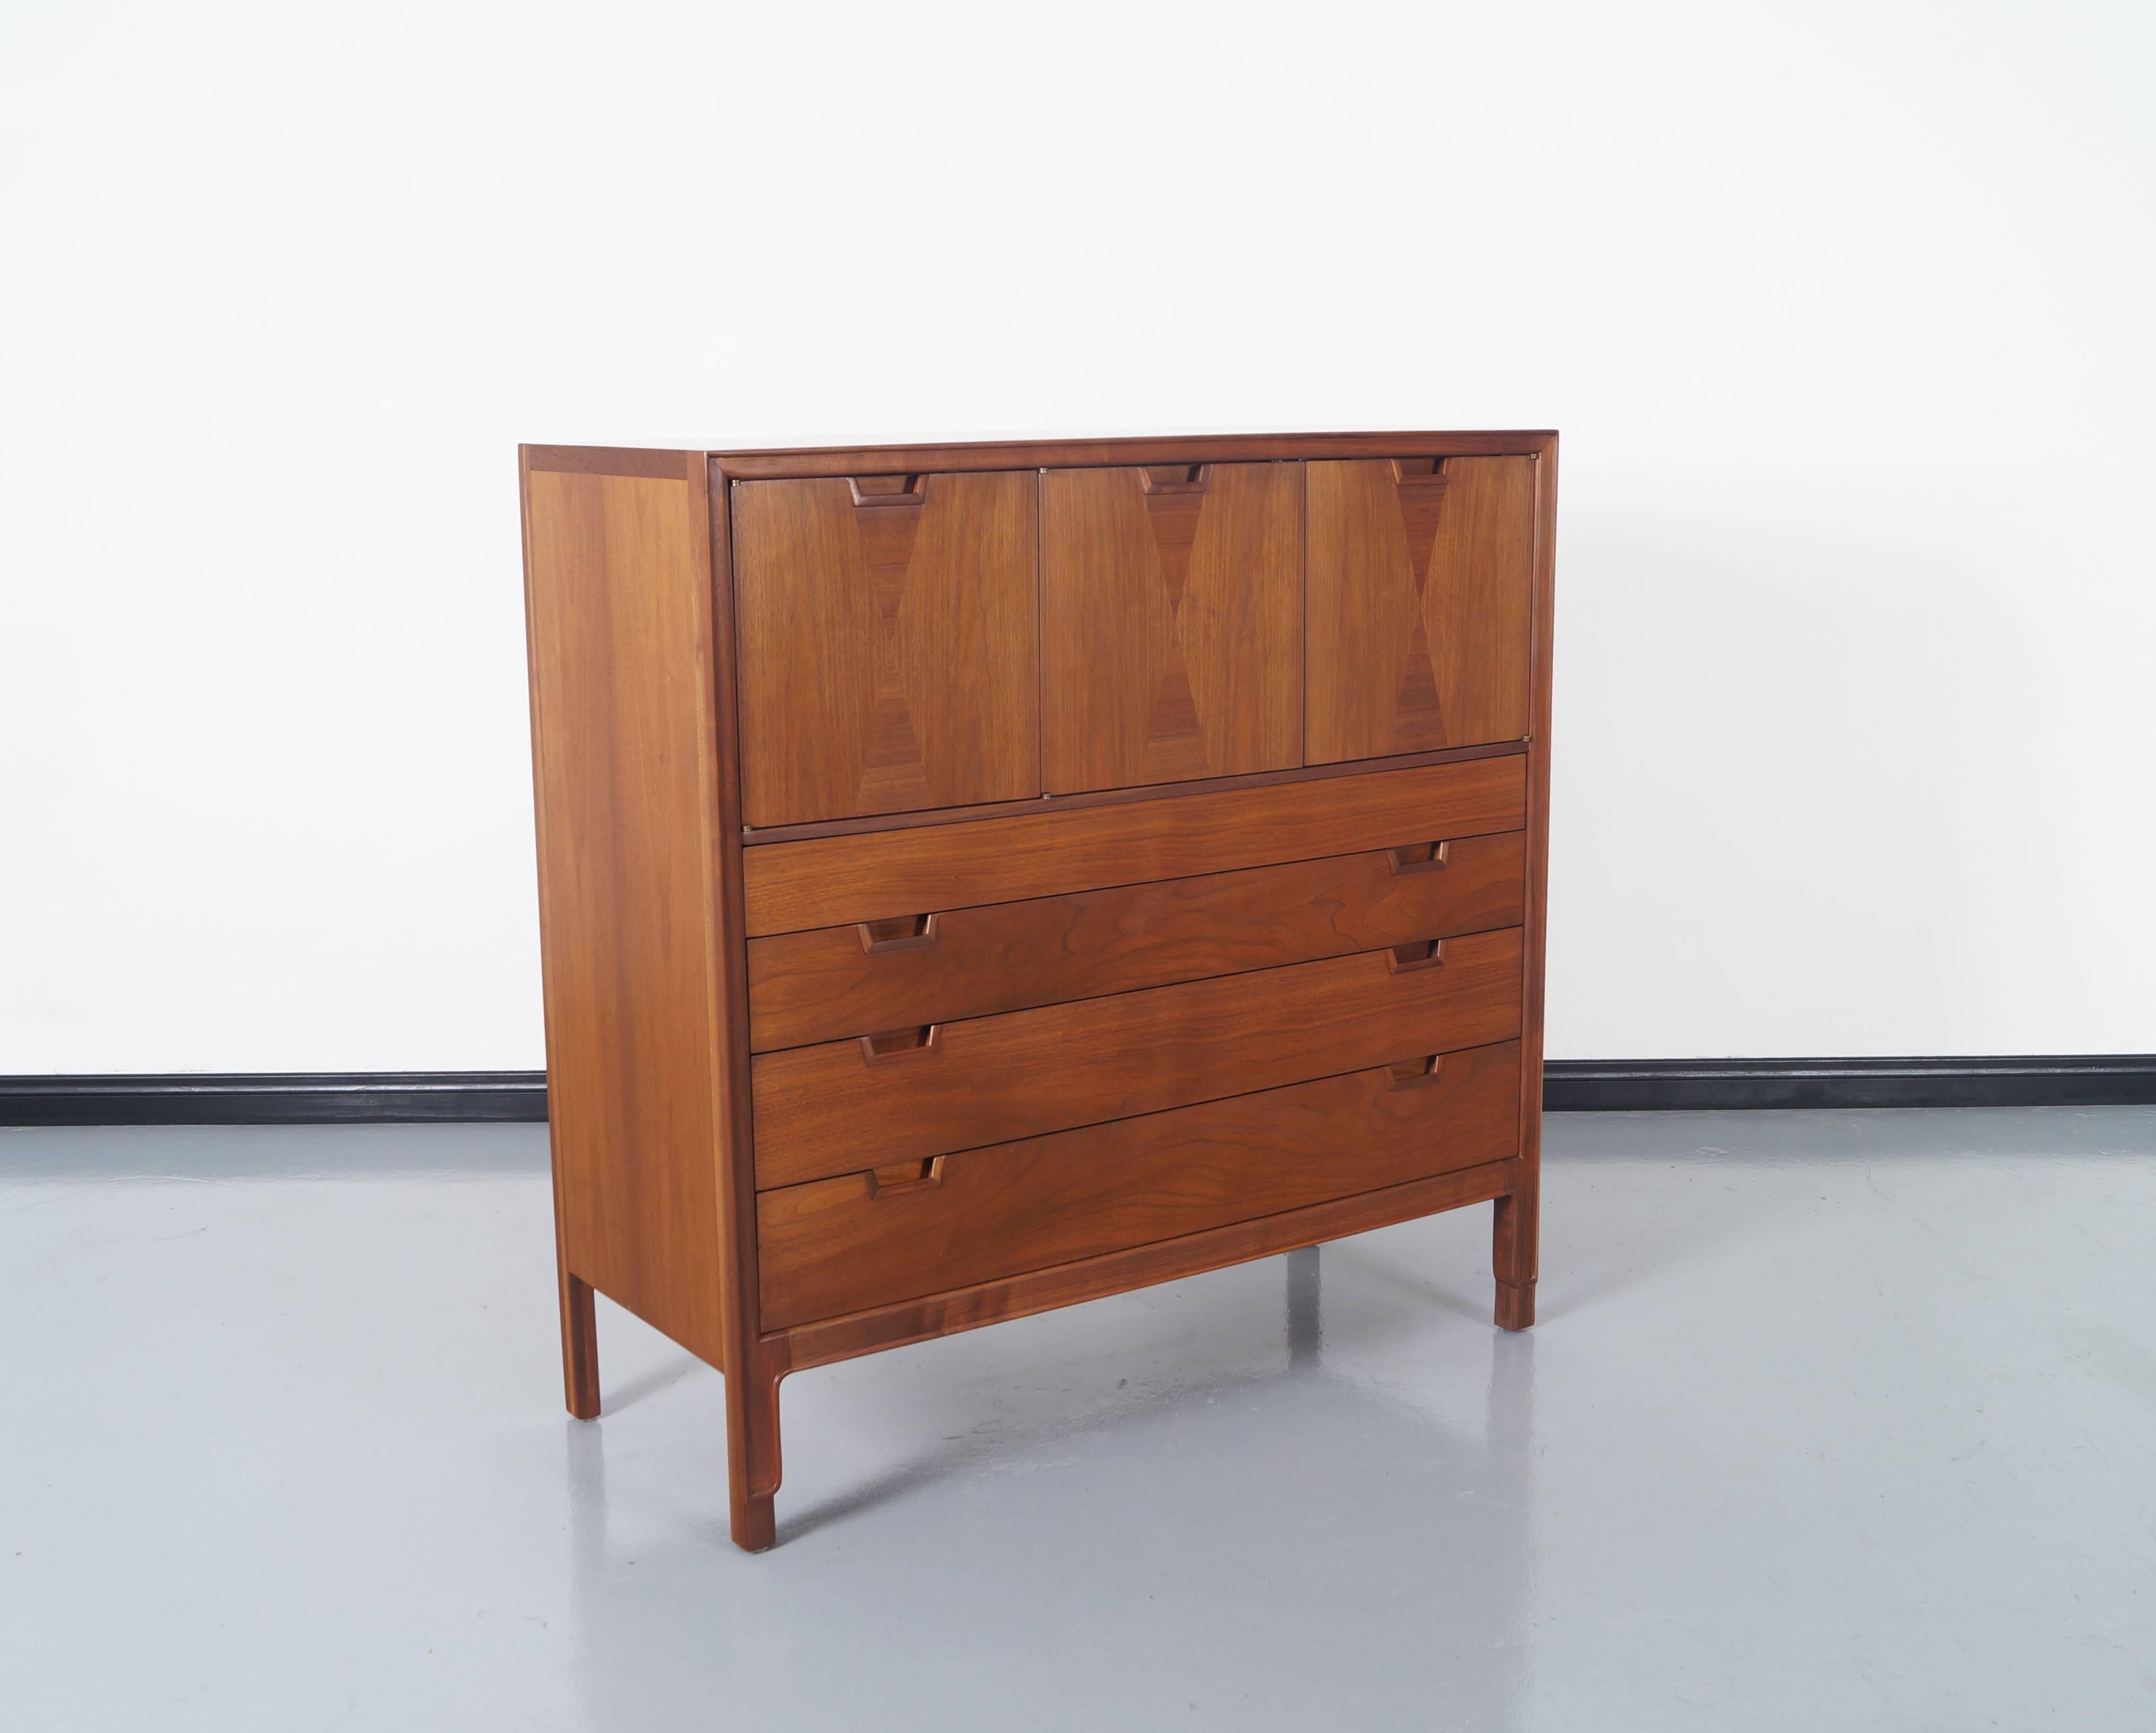 Mid-Century walnut highboy by John Stuart for Janus Collection. Features three compartments on top and four drawers on the bottom. Beautiful inlaid details on the top doors.